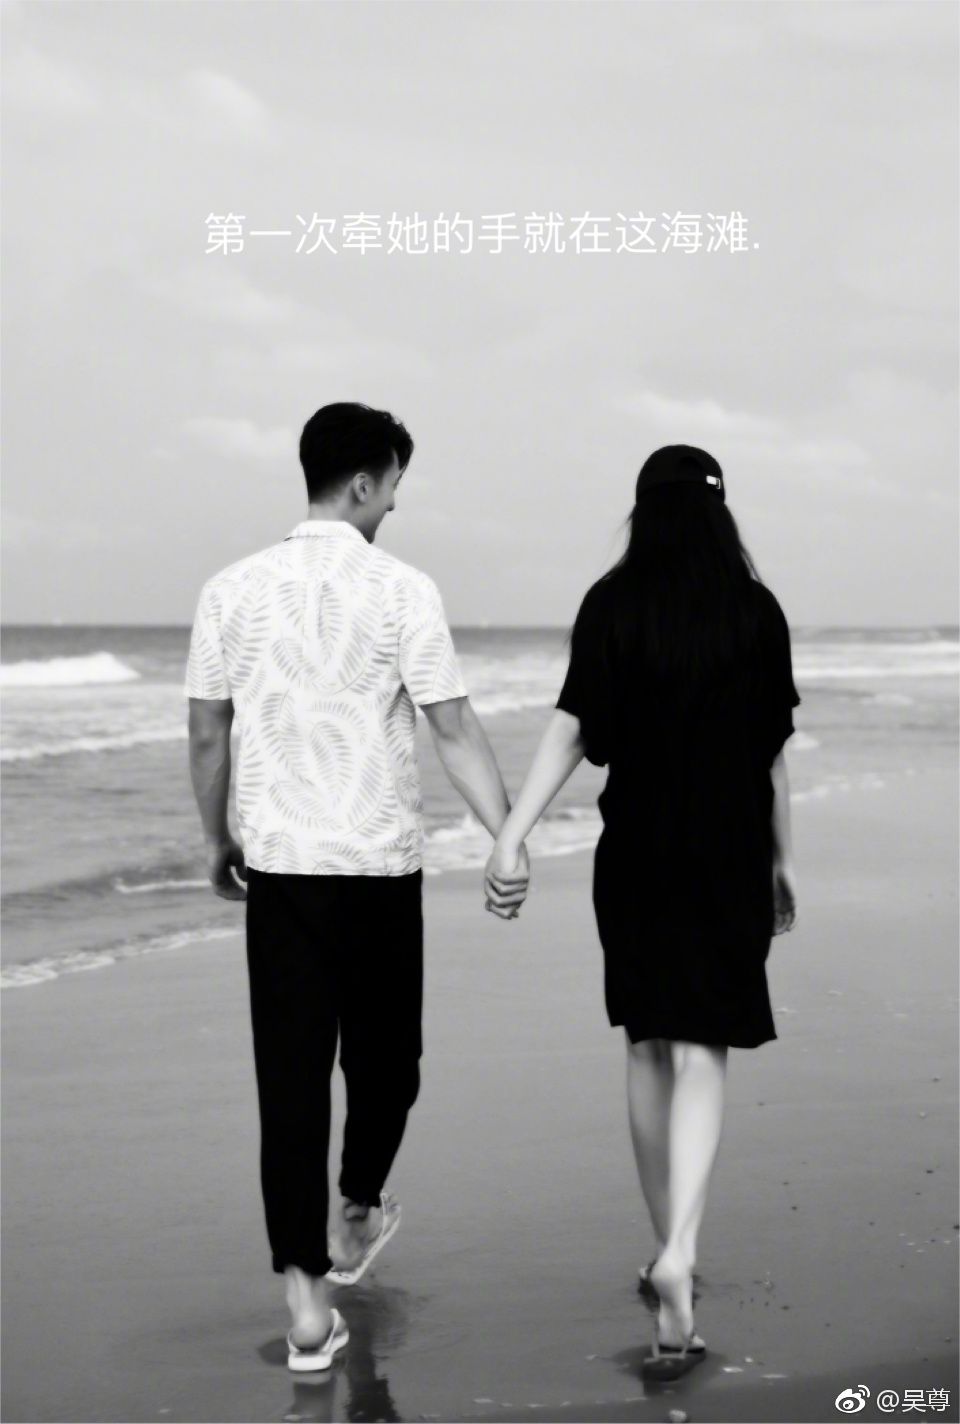 White, Photograph, Black, People, Standing, Black-and-white, Monochrome photography, Holding hands, Snapshot, Photography, 